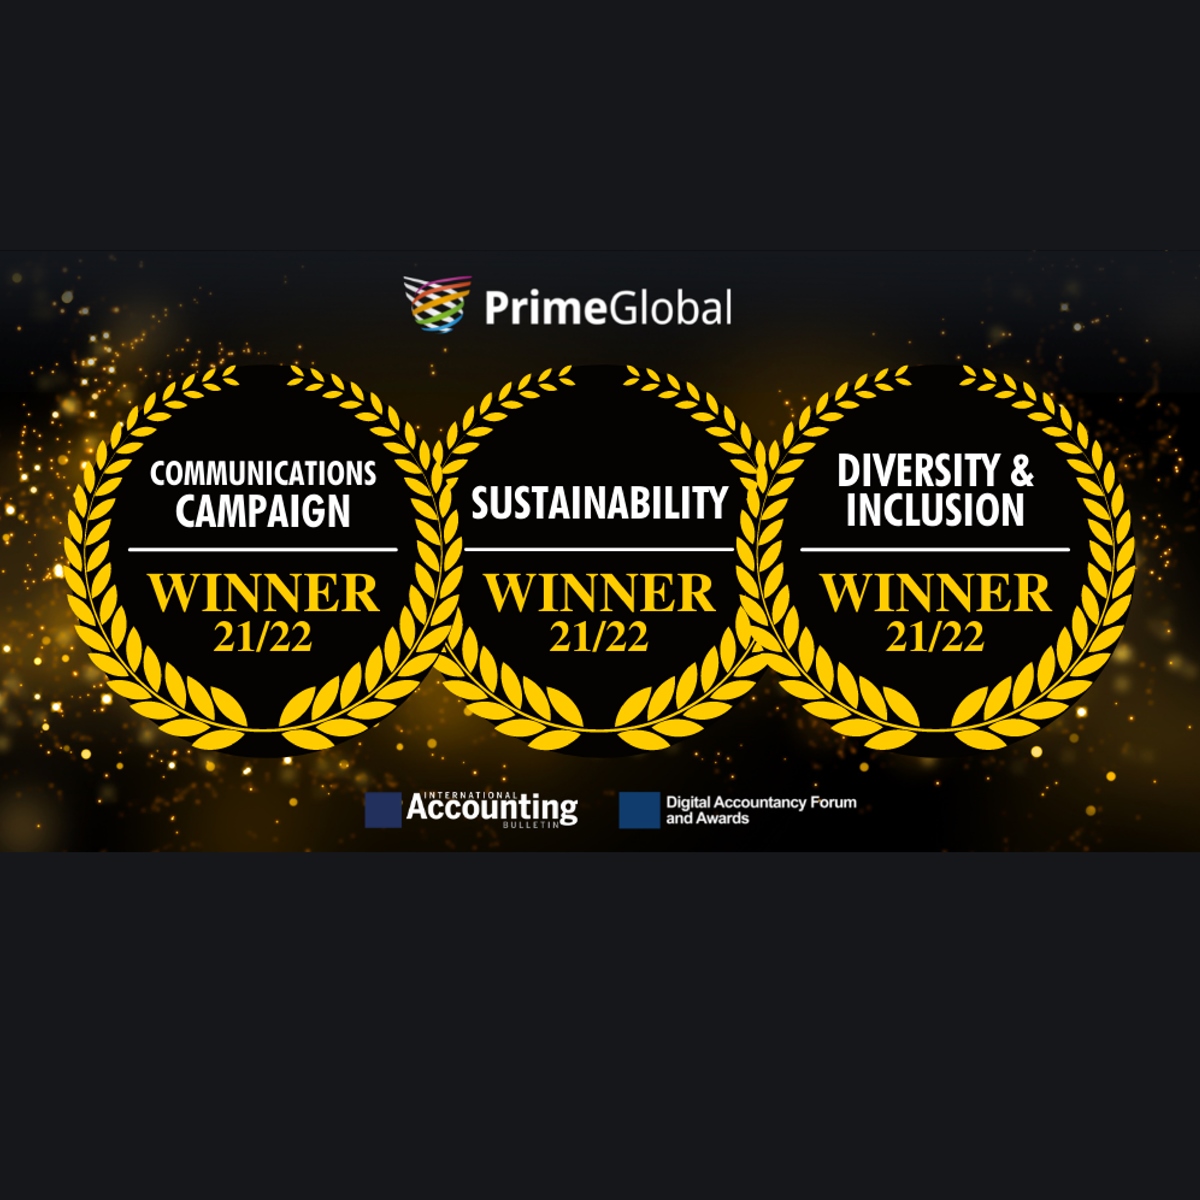 PrimeGlobal Honored To Win In Three Categories At IAB Awards